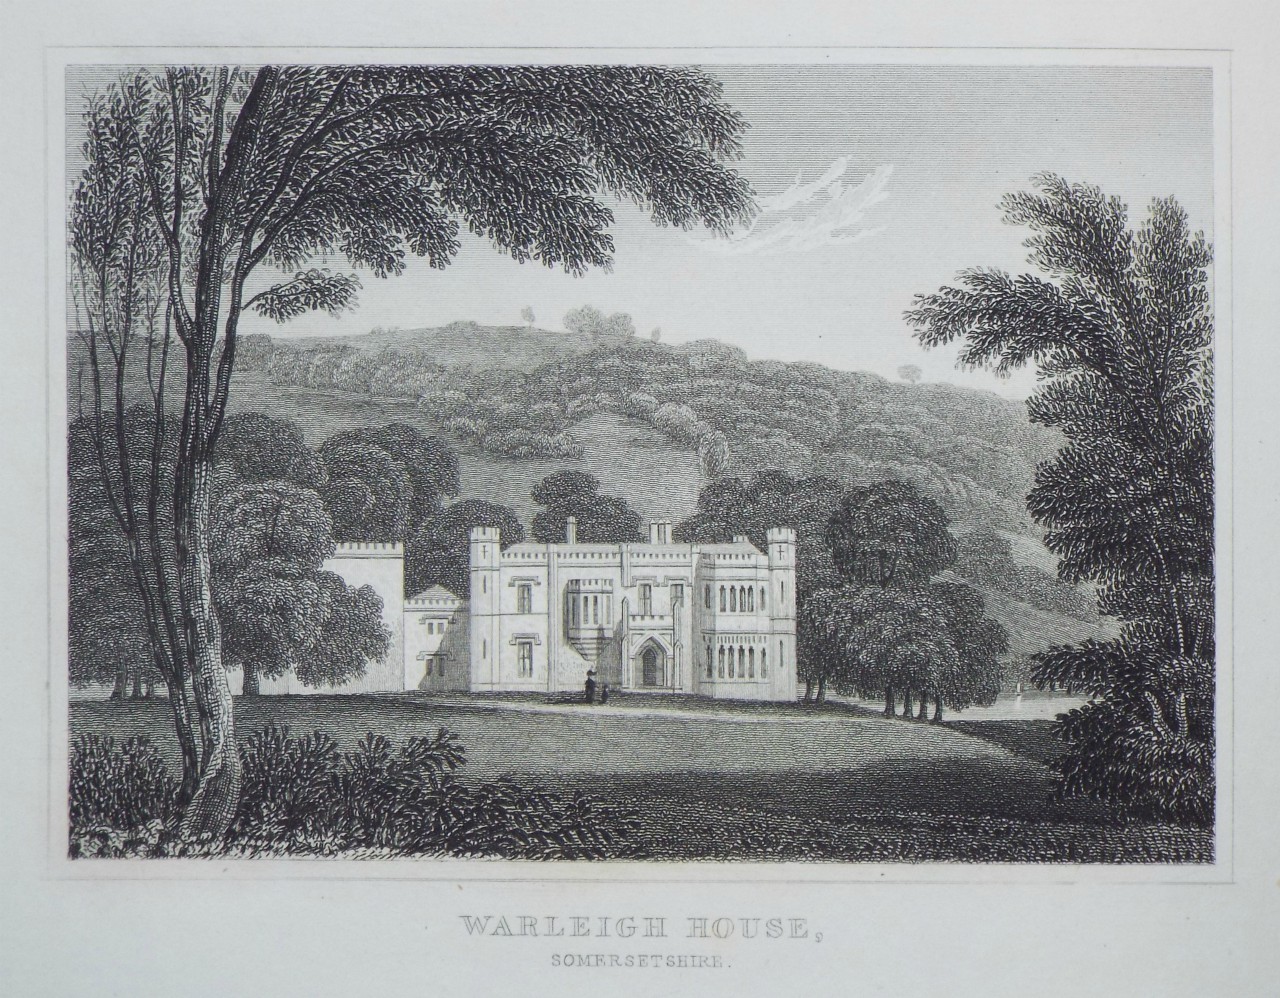 Print - Warleigh House, Somersetshire. - Taylor